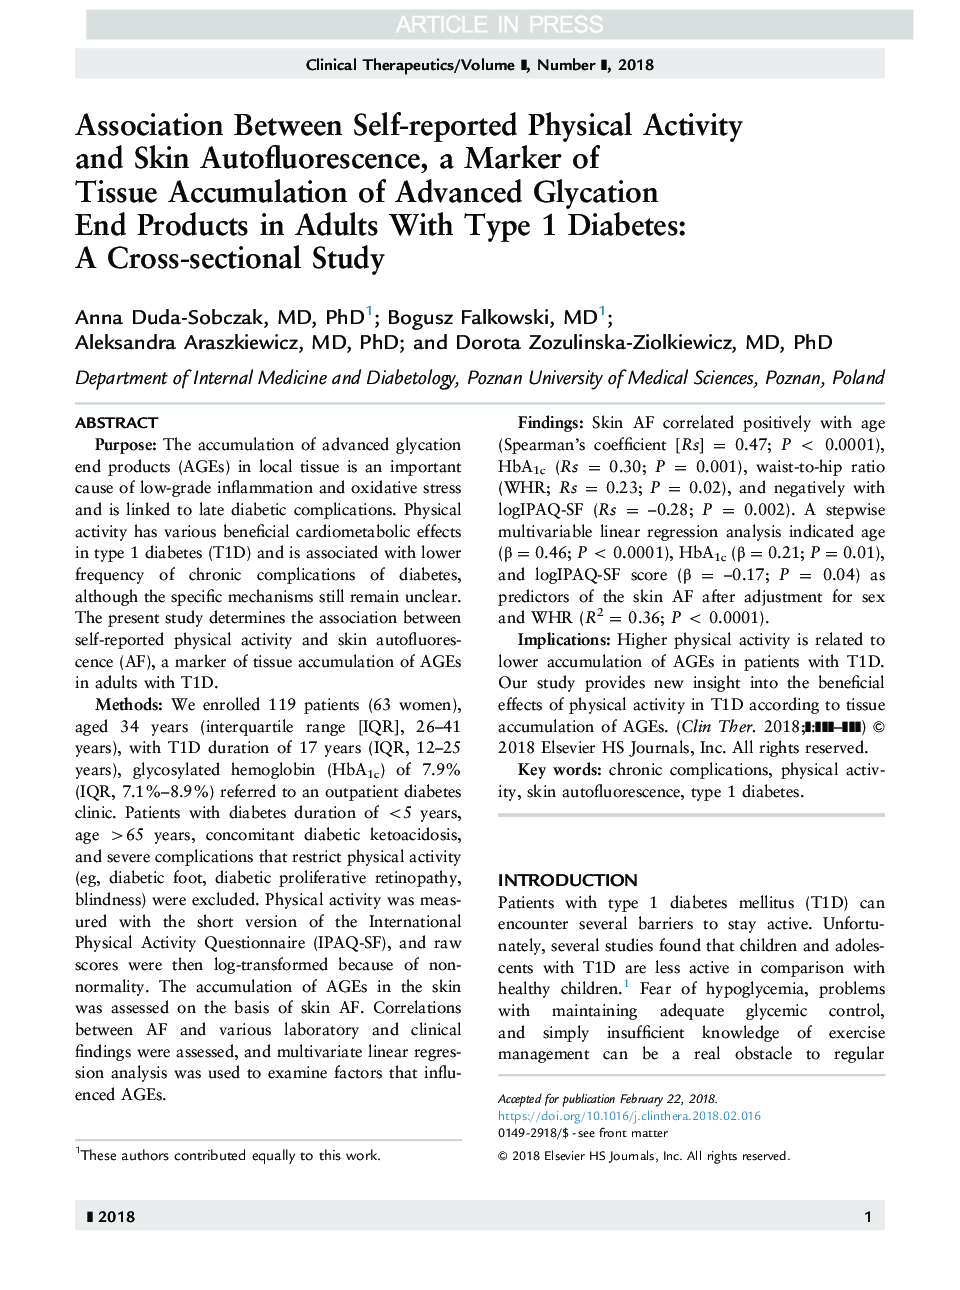 Association Between Self-reported Physical Activity and Skin Autofluorescence, a Marker of Tissue Accumulation of Advanced Glycation End Products in Adults With Type 1 Diabetes: A Cross-sectional Study